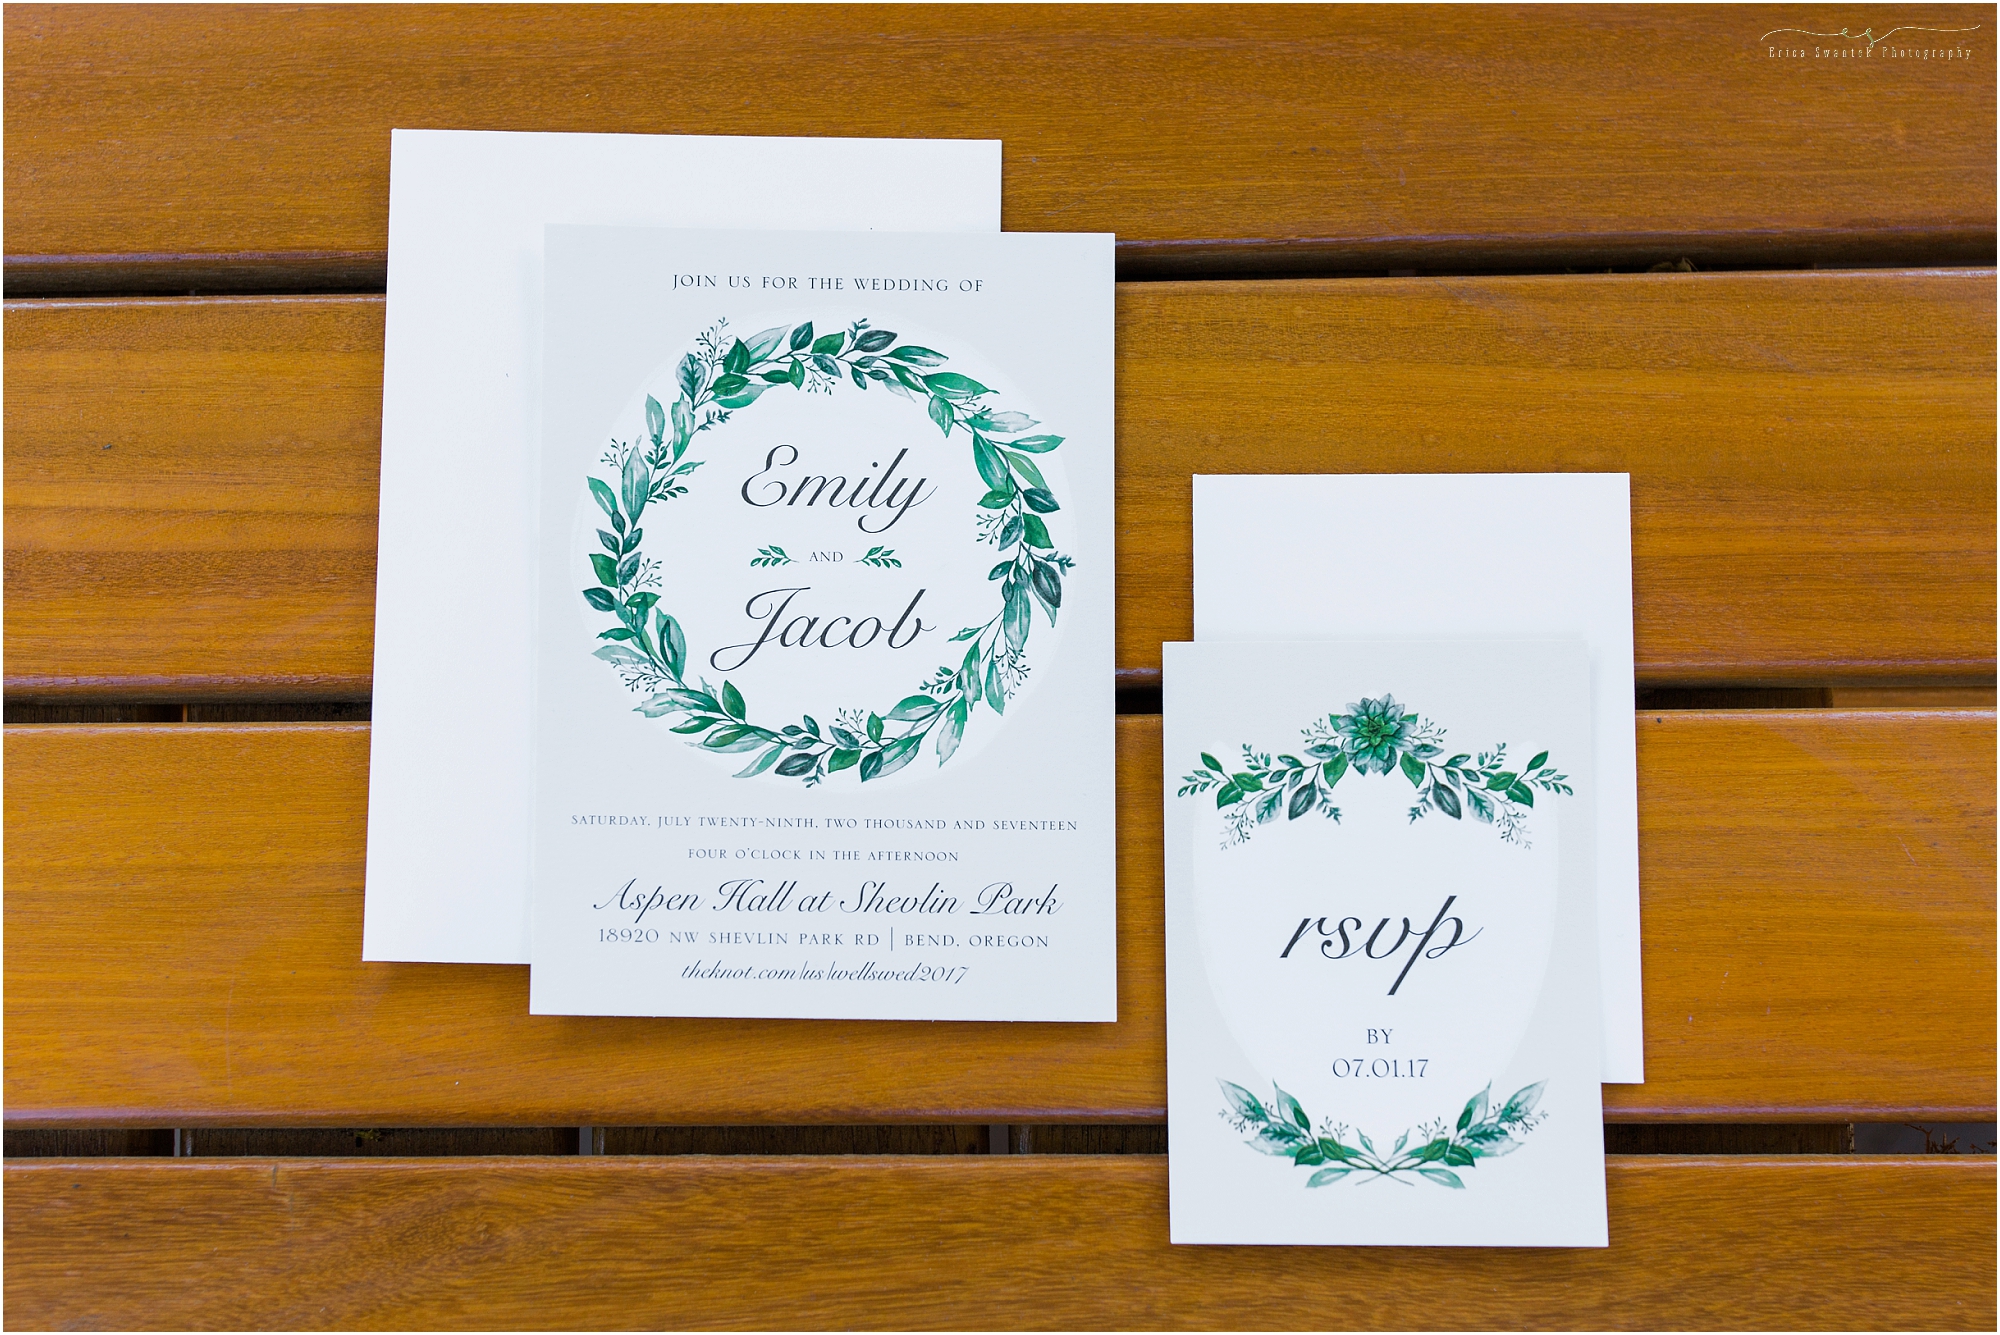 Gorgeous simple invites for a vintage rustic chic Bend wedding. | Erica Swantek Photography